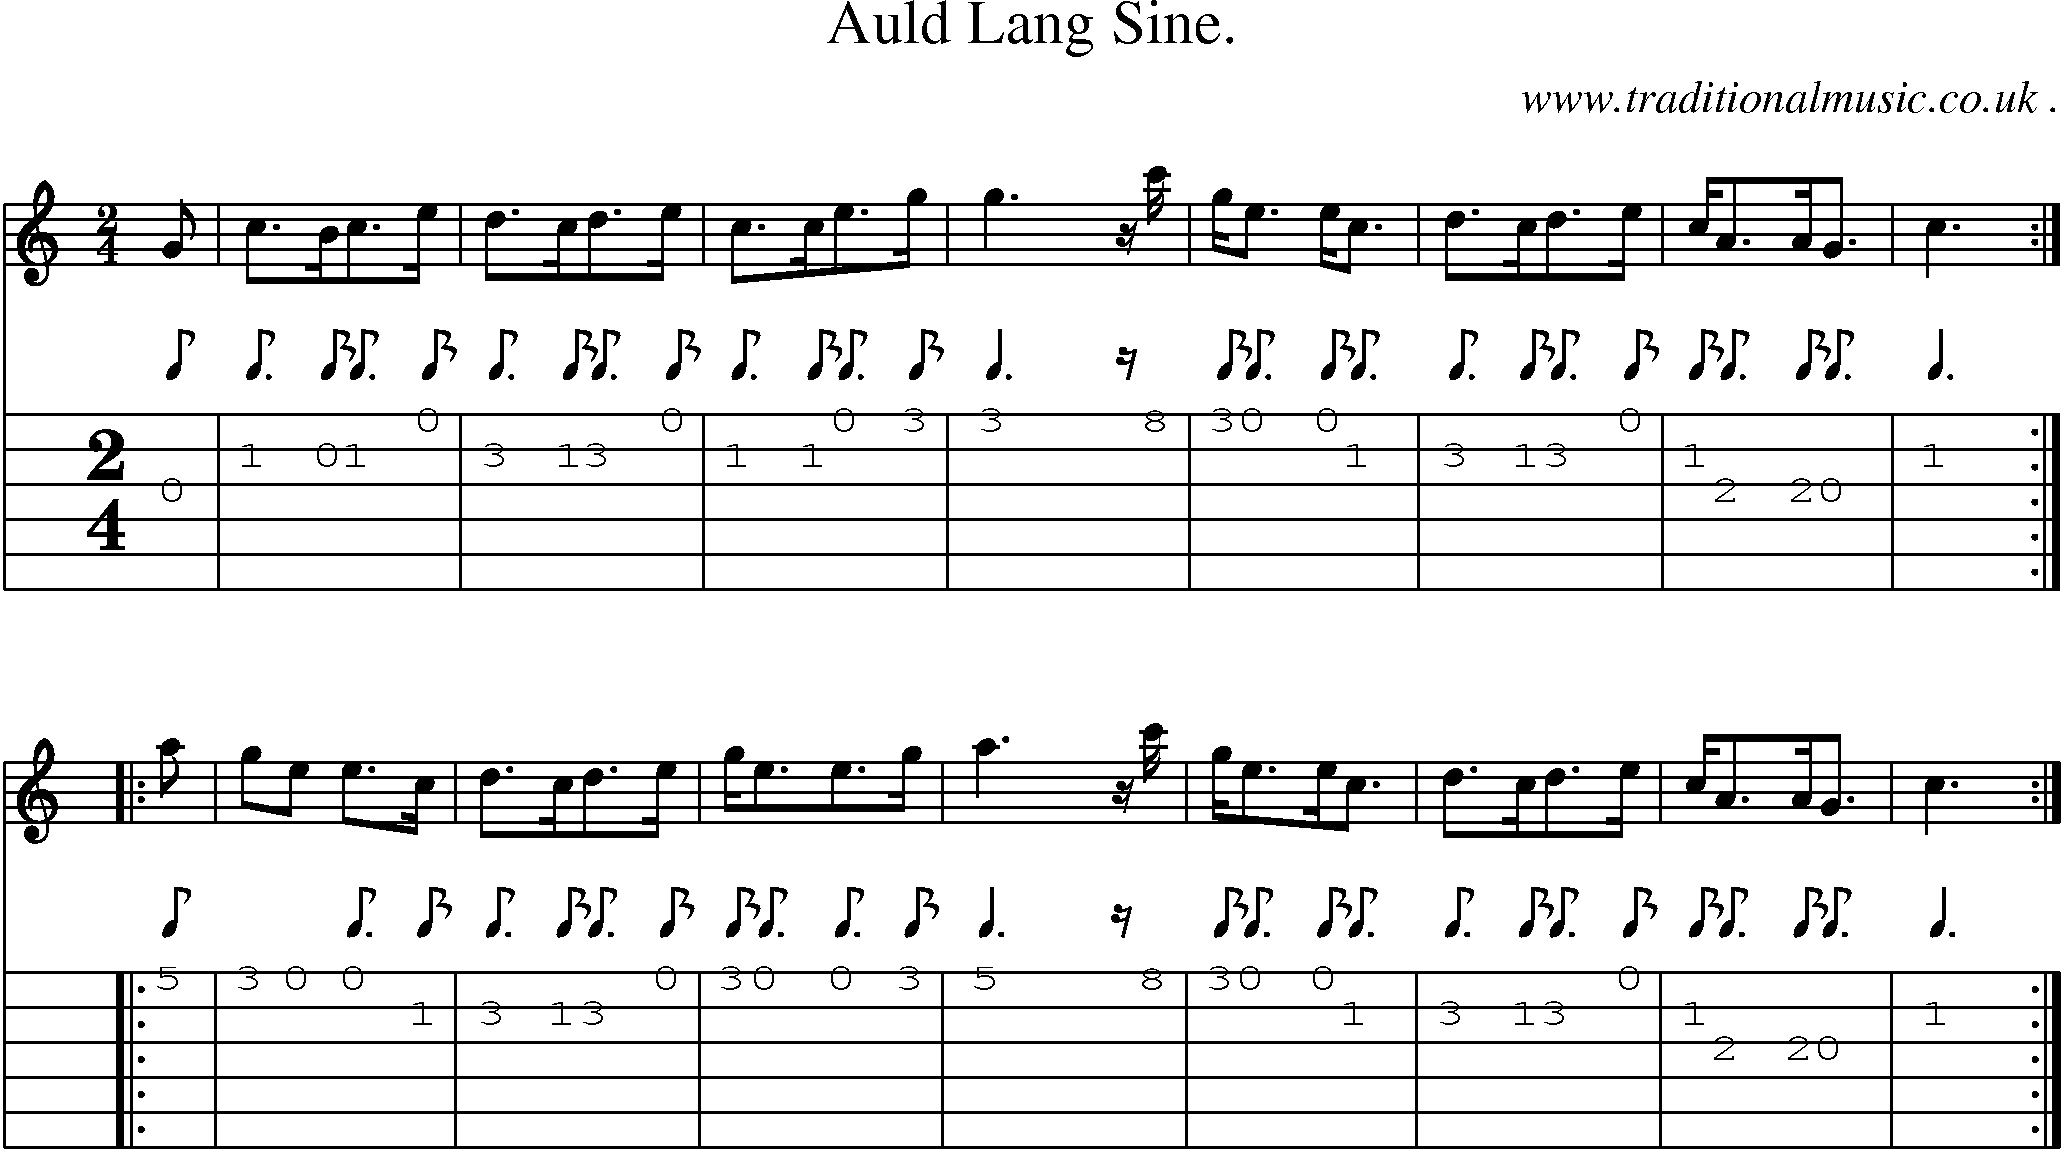 Sheet-Music and Guitar Tabs for Auld Lang Sine